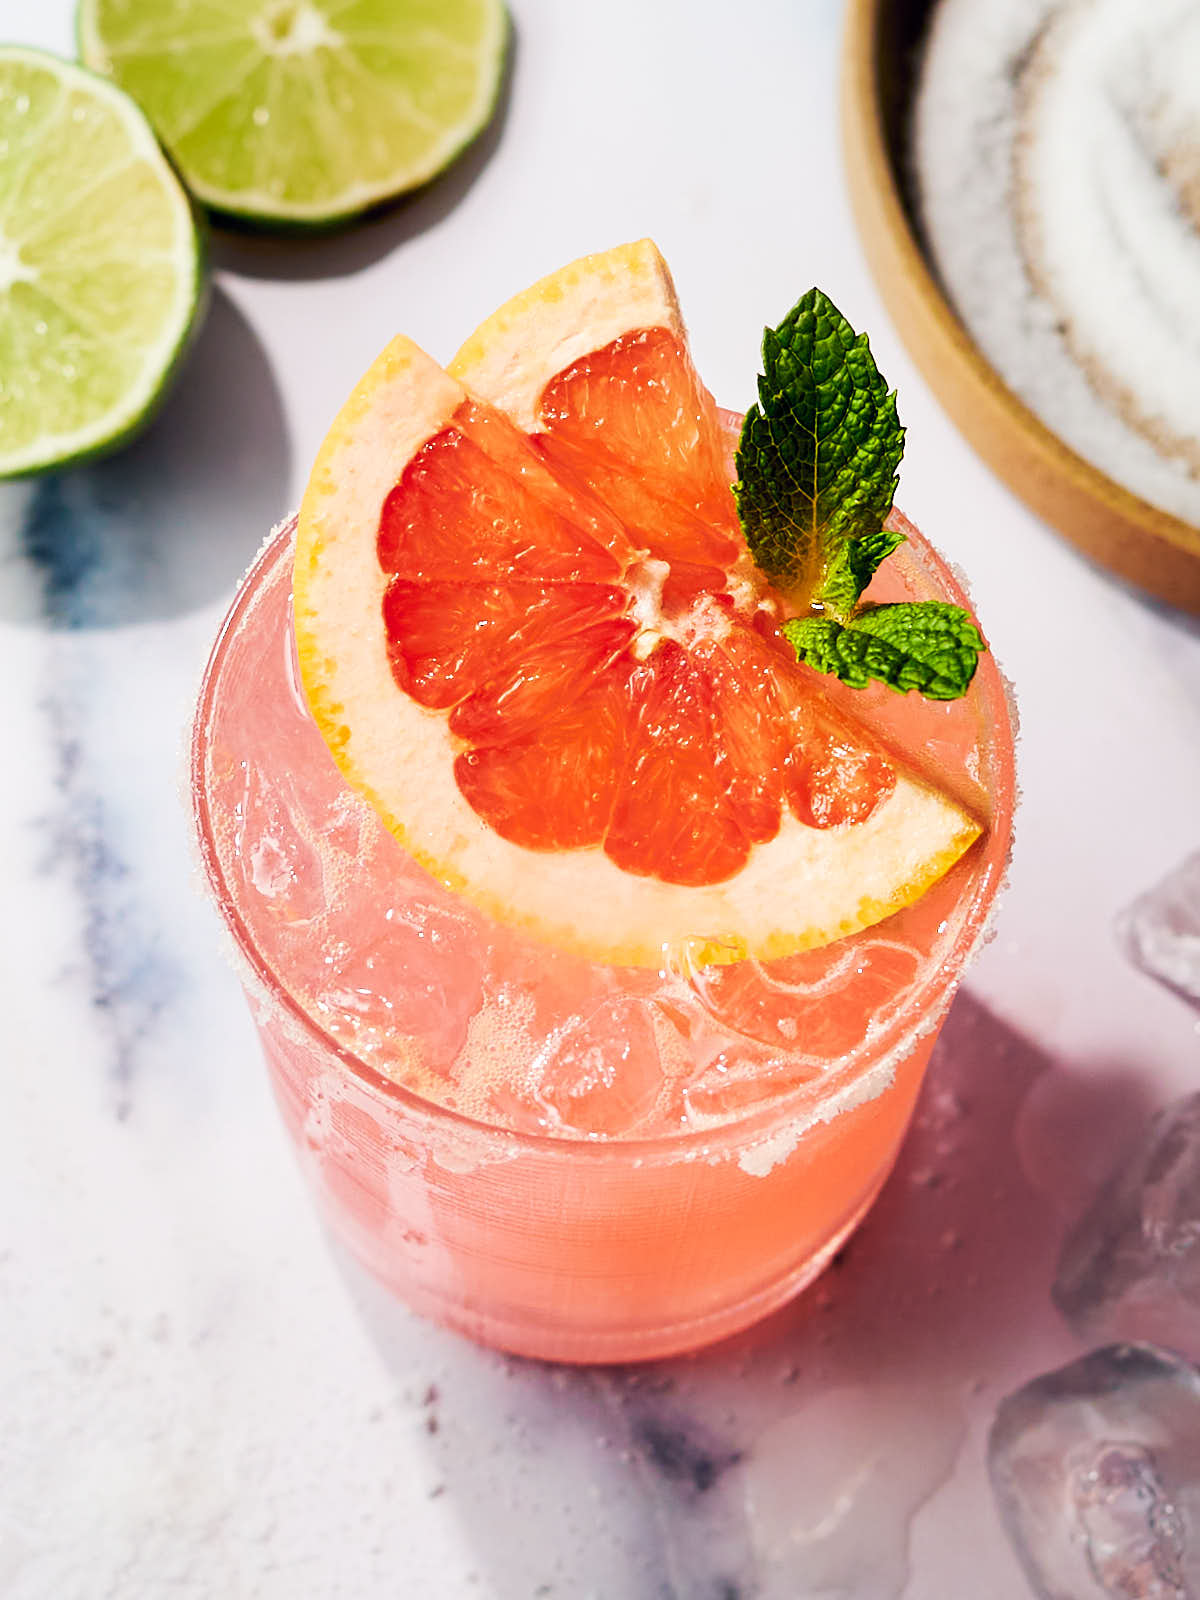 A cocktail glass of Grapefruit Paloma topped with mint.